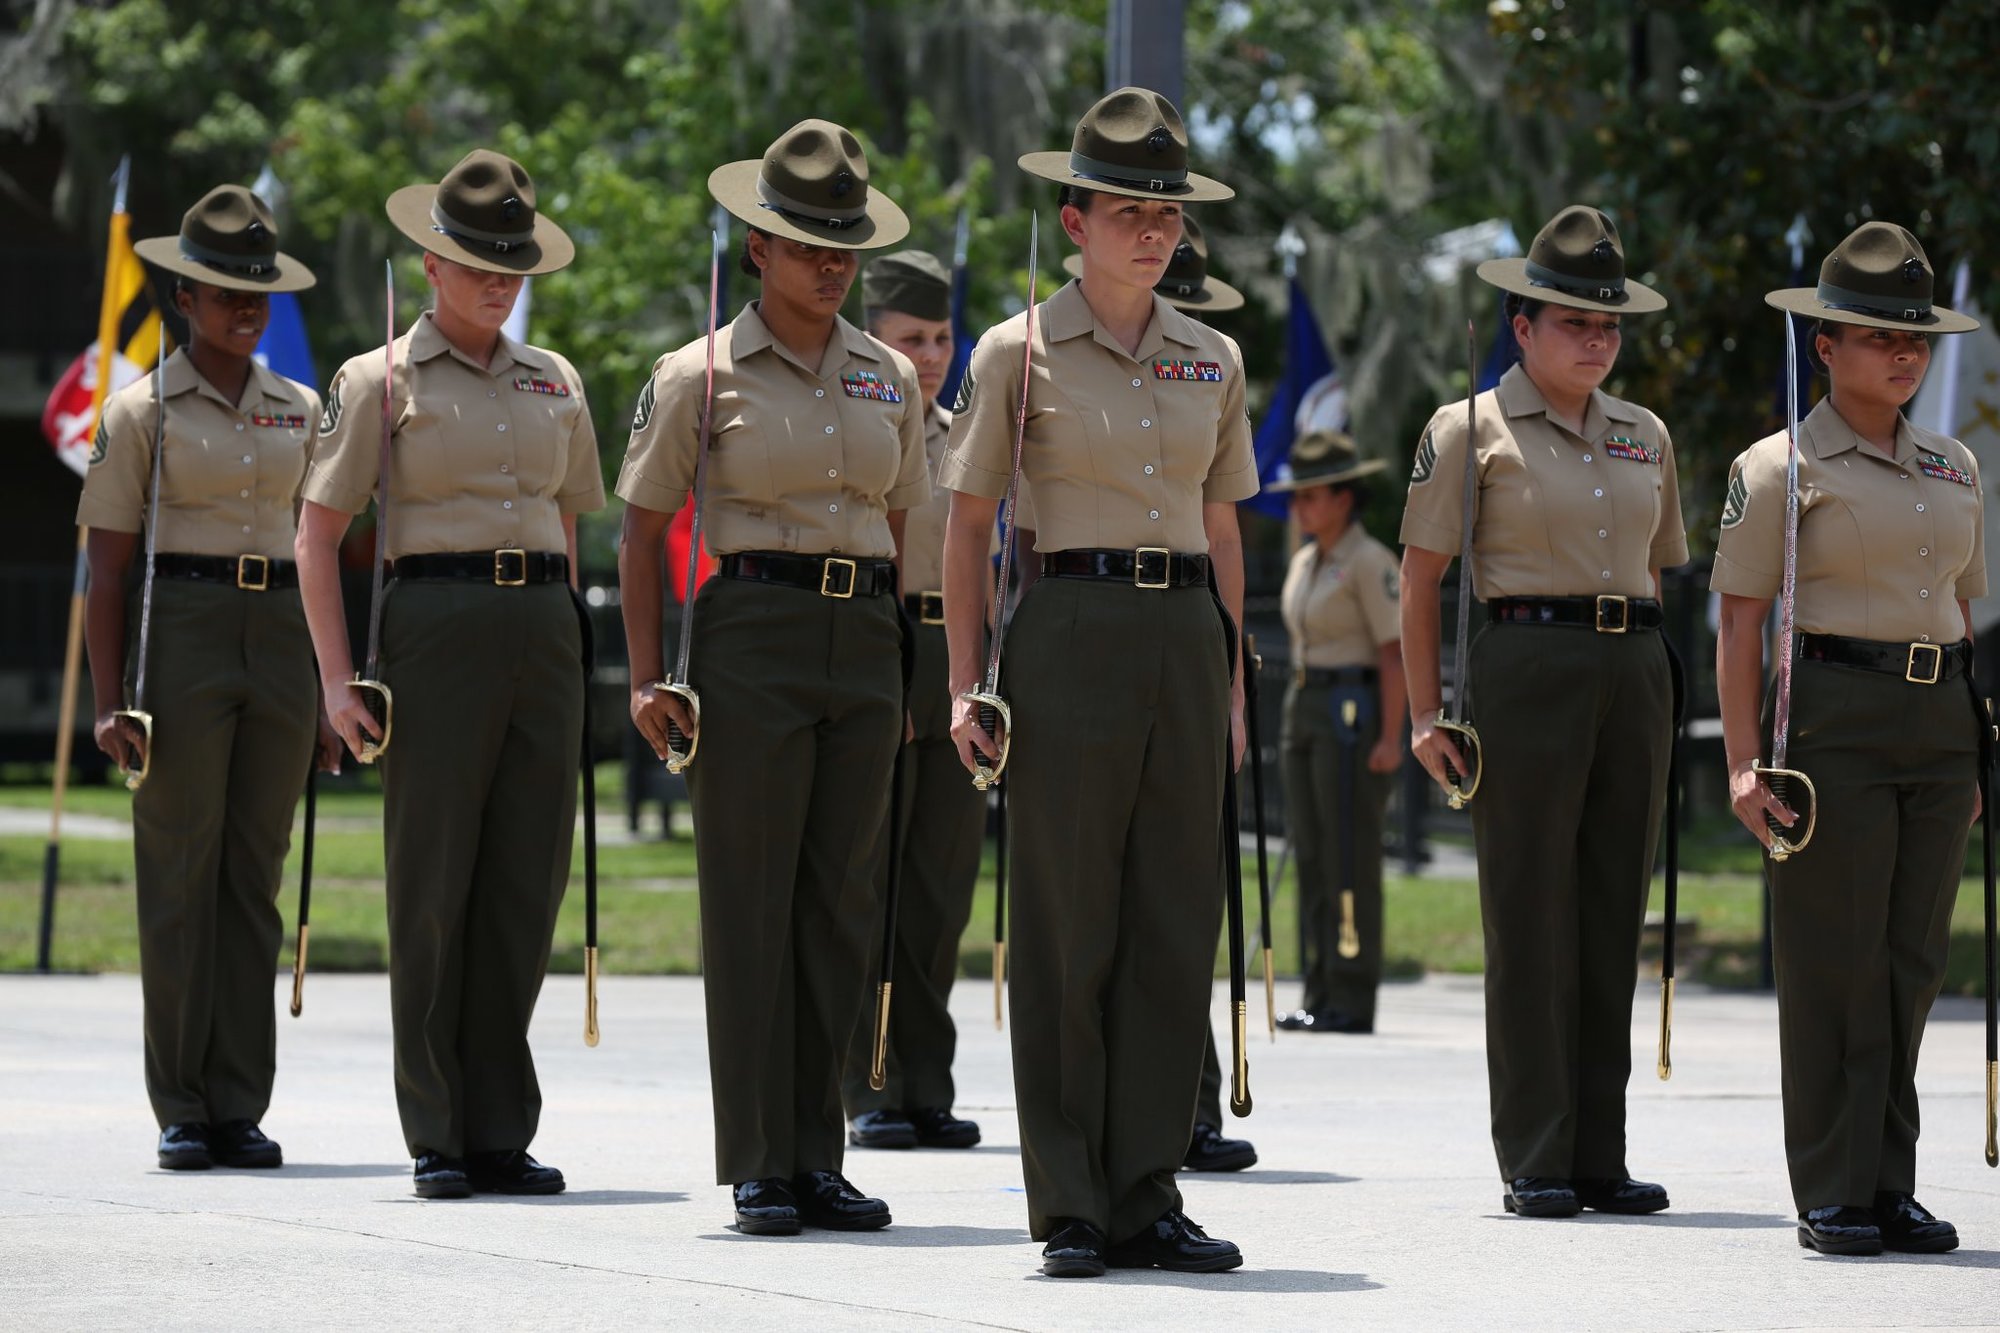 U.S. Marines with 4th Recruit Training Battalion, Recruit Training Regiment, Marine Corps Recruit Depot Parris Island, stand at the position of attention during the 4th Battalion relief and appointment ceremony aboard Marine Corps Recruit Depot Parris Island, S.C., July 18, 2014. The relief and appointment ceremony represents the transfer of responsibility, authority and accountability from the outgoing sergeant major to the incoming sergeant major. (U.S. Marine Corps photo by Lance Cpl. Allison Lotz MCRD Parris Island Combat Camera/Released)